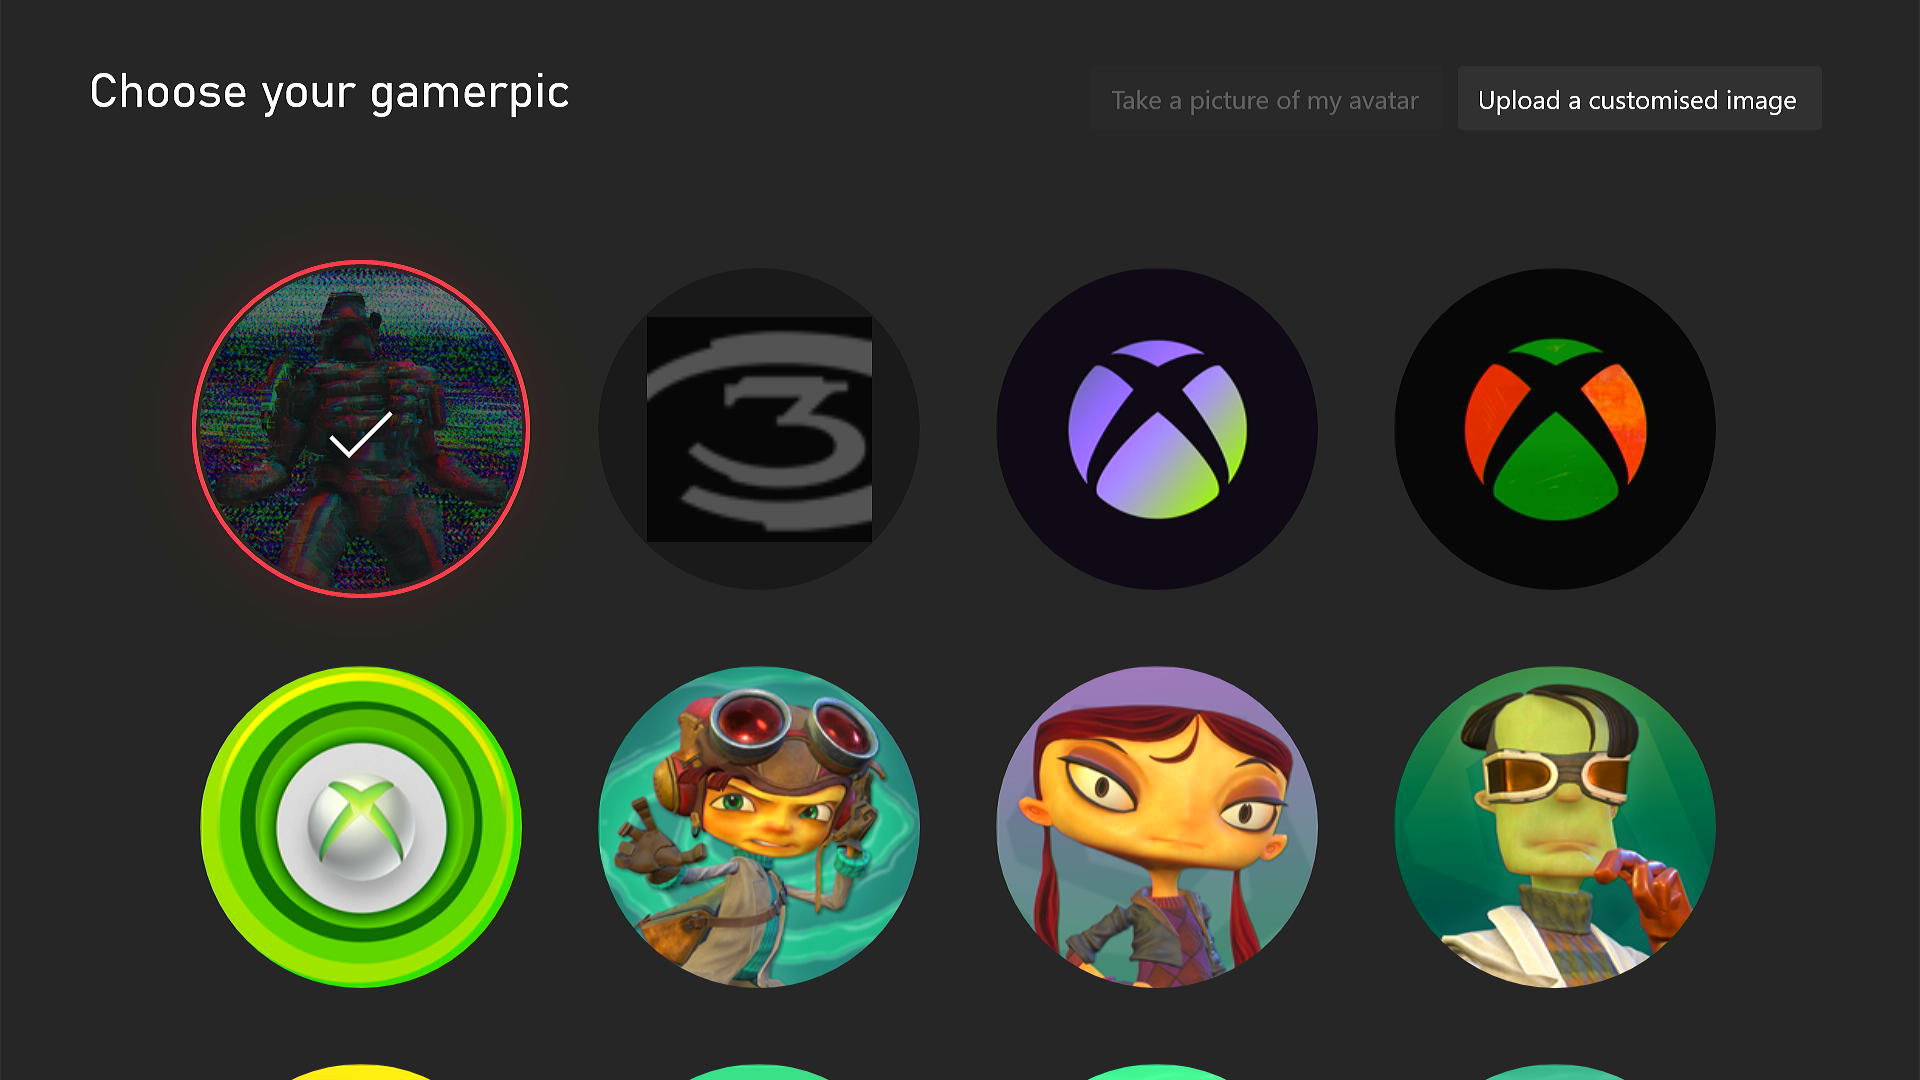 Xbox engineer fixes user's tiny, 15-year-old 360 gamerpic